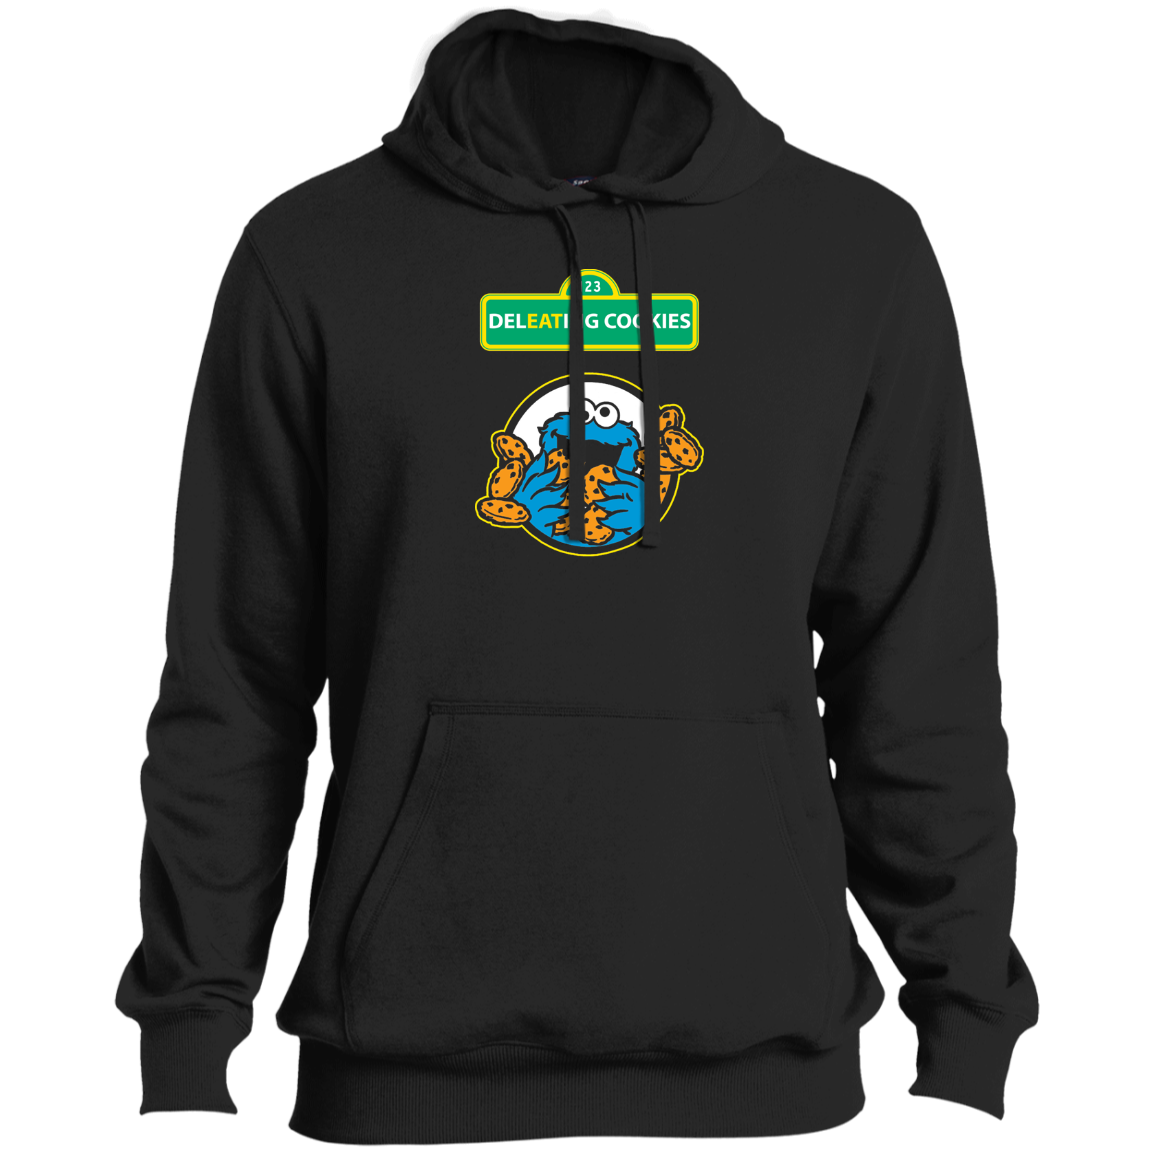 ArtichokeUSA Custom Design #55. DelEATing Cookes. IT humor. Cookie Monster Parody. Ultra Soft Pullover Hoodie